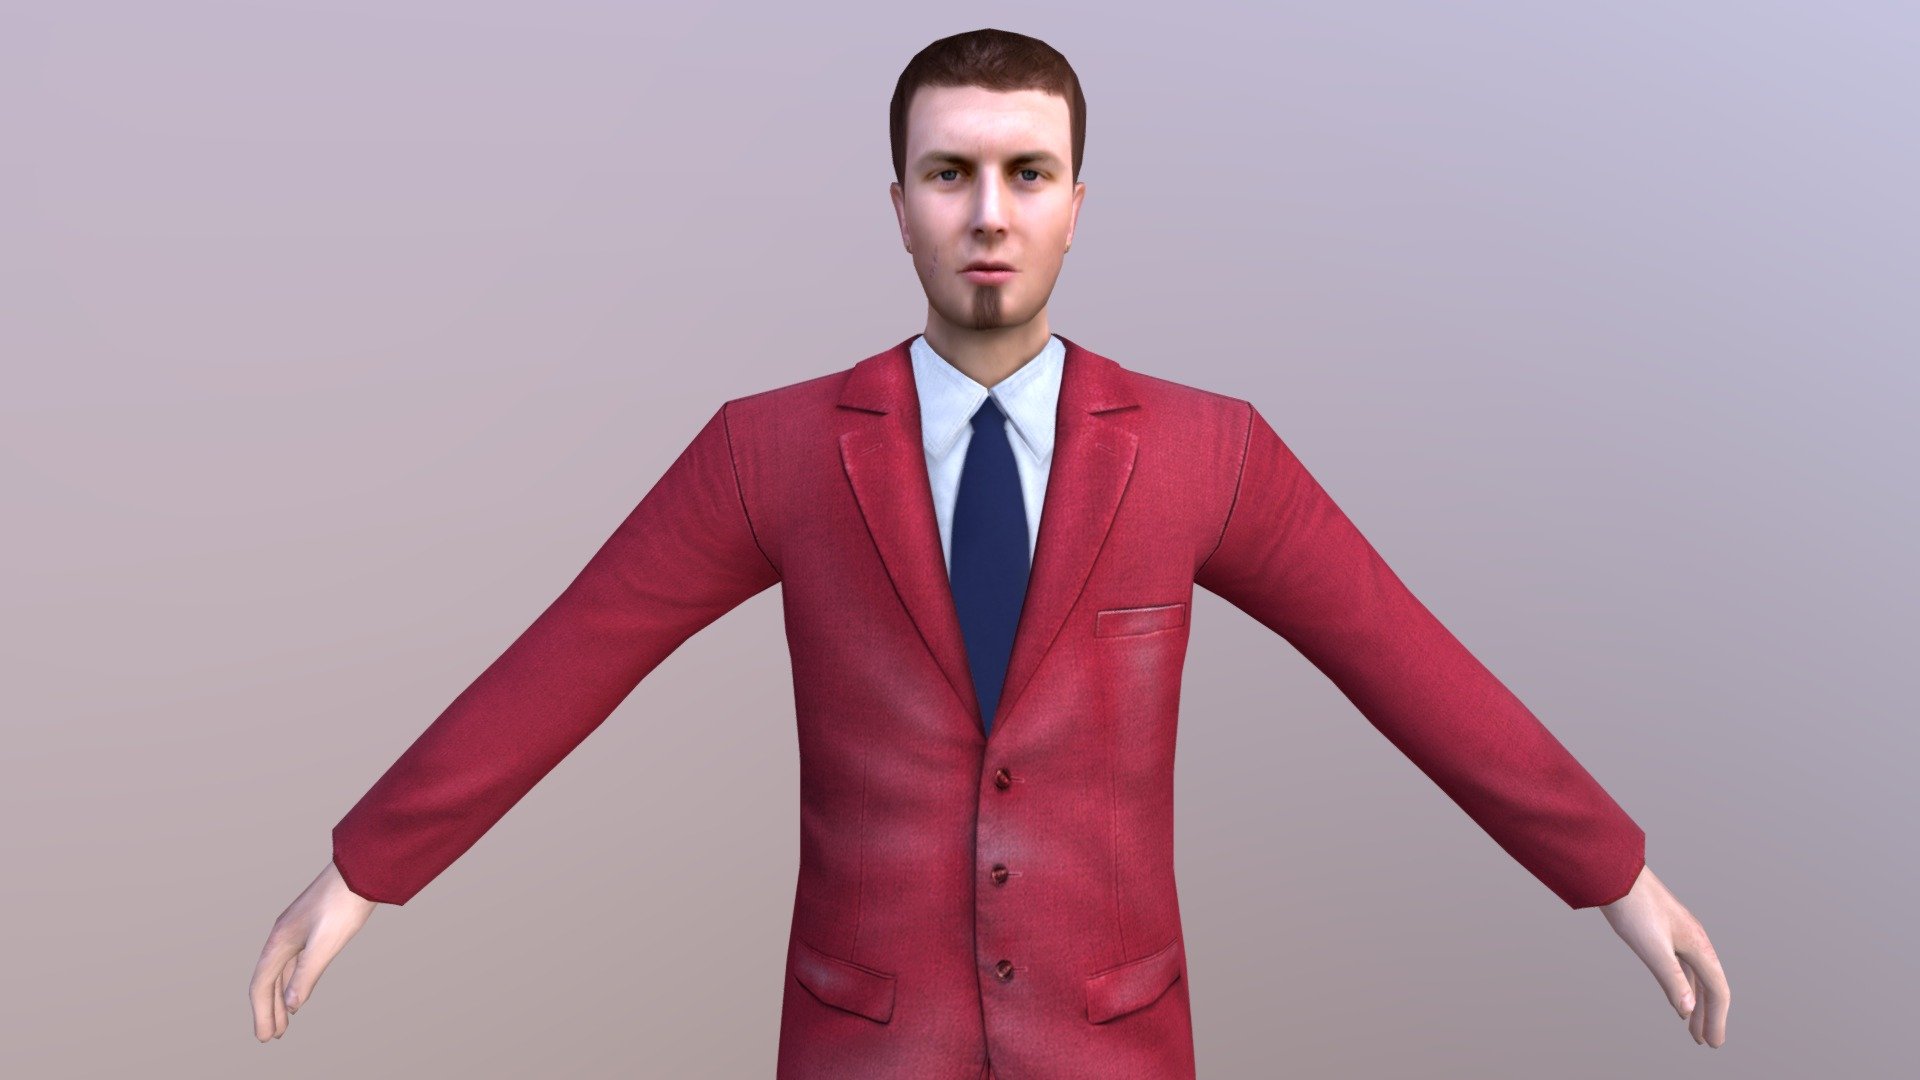 HUMAN CHARACTER WITH 250 ANIMATIONS

PLEASE VISIT MY PROFILE FOR VIEW AND DOWNLOAD MORE LOW POLY AND REALISTIC HIGH POLY CHARACTERS

*AVAILABLE FILE FORMATS  :-




3DS MAX (.MAX) - 2017 

MAYA  (.MA ) - 2017

UNITY   (.UNITYPACKAGE)  -2018

CINEMA 4D  (.C4D) - R19

BLENDER  (.BLEND) - 2.9

FBX   (.FBX)  VERSION- 7.4 

OBJ  (.OBJ) 

COLLADA  (.DAE)   

YOU CAN ALSO IMPORT IN &ldquo;UNREAL ENGINE